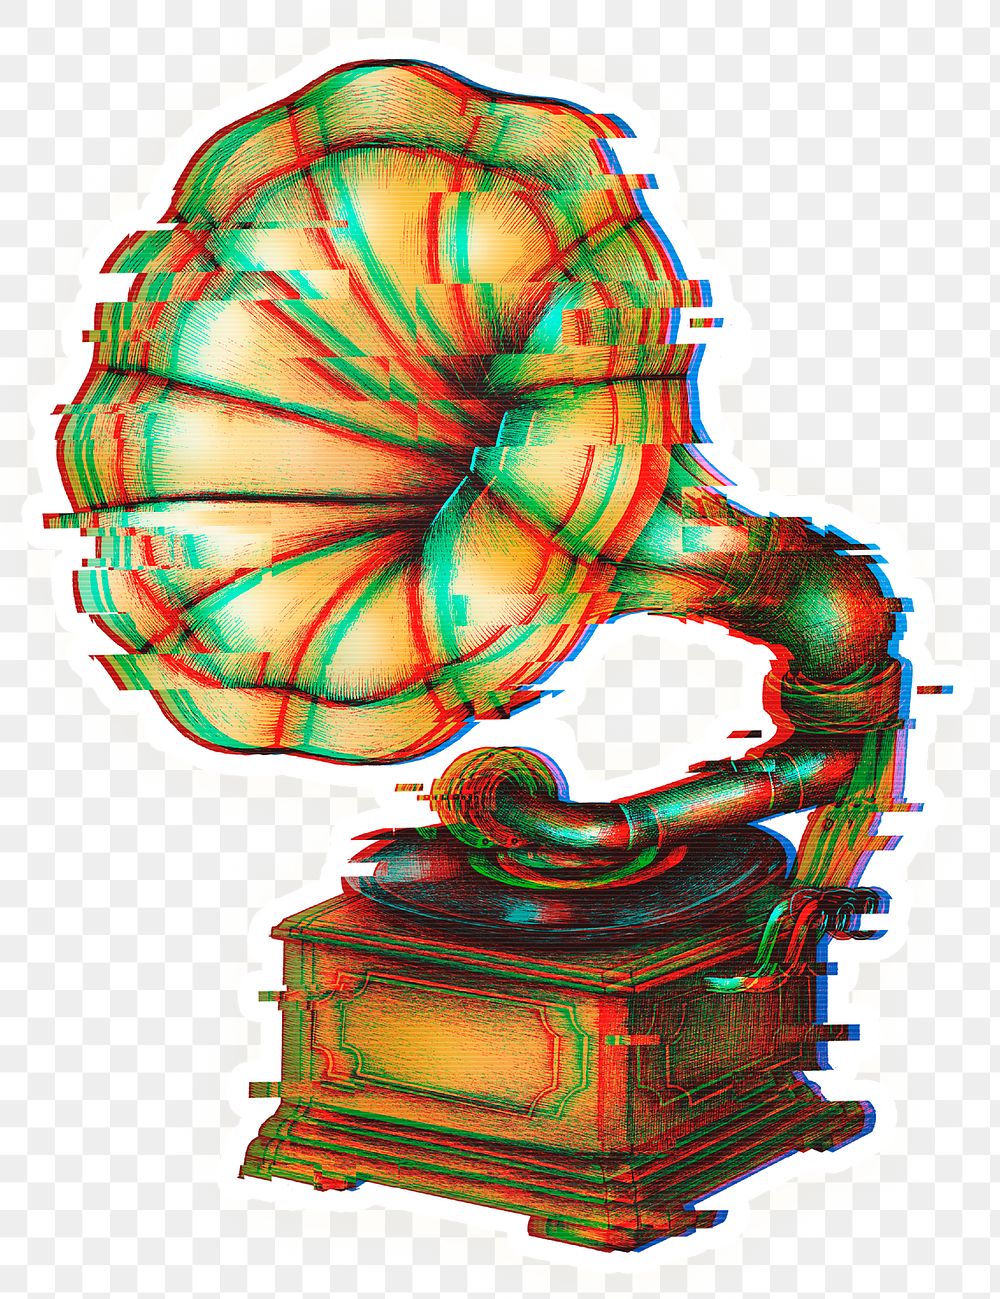 Gramophone with a glitch effect sticker overlay with a white border